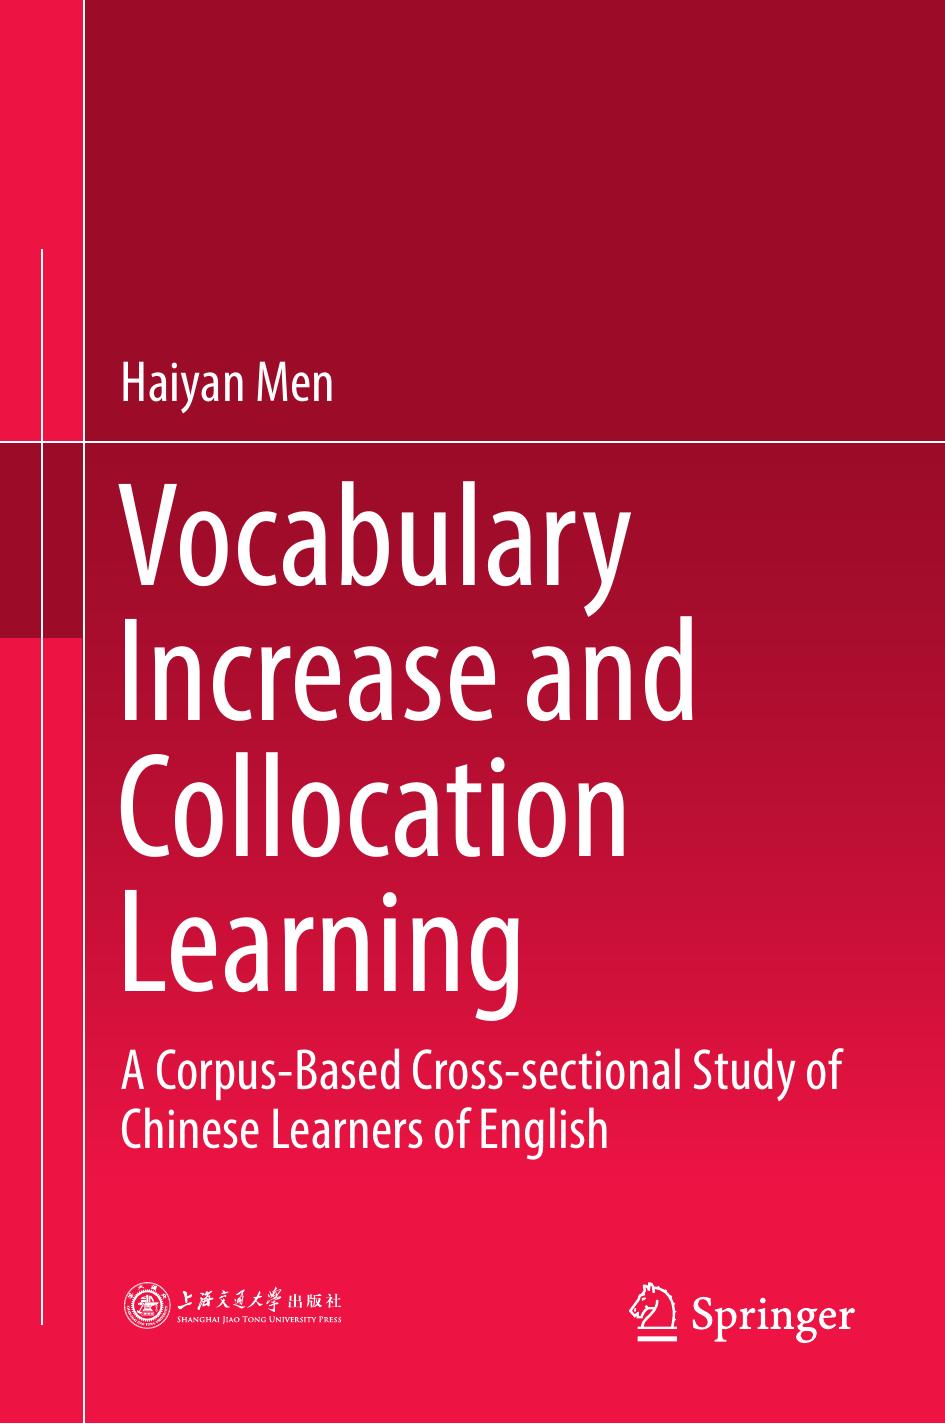 Vocabulary Increase and Collocation Learning: A Corpus-Based Cross-Sectional Study of Chinese Learners of English